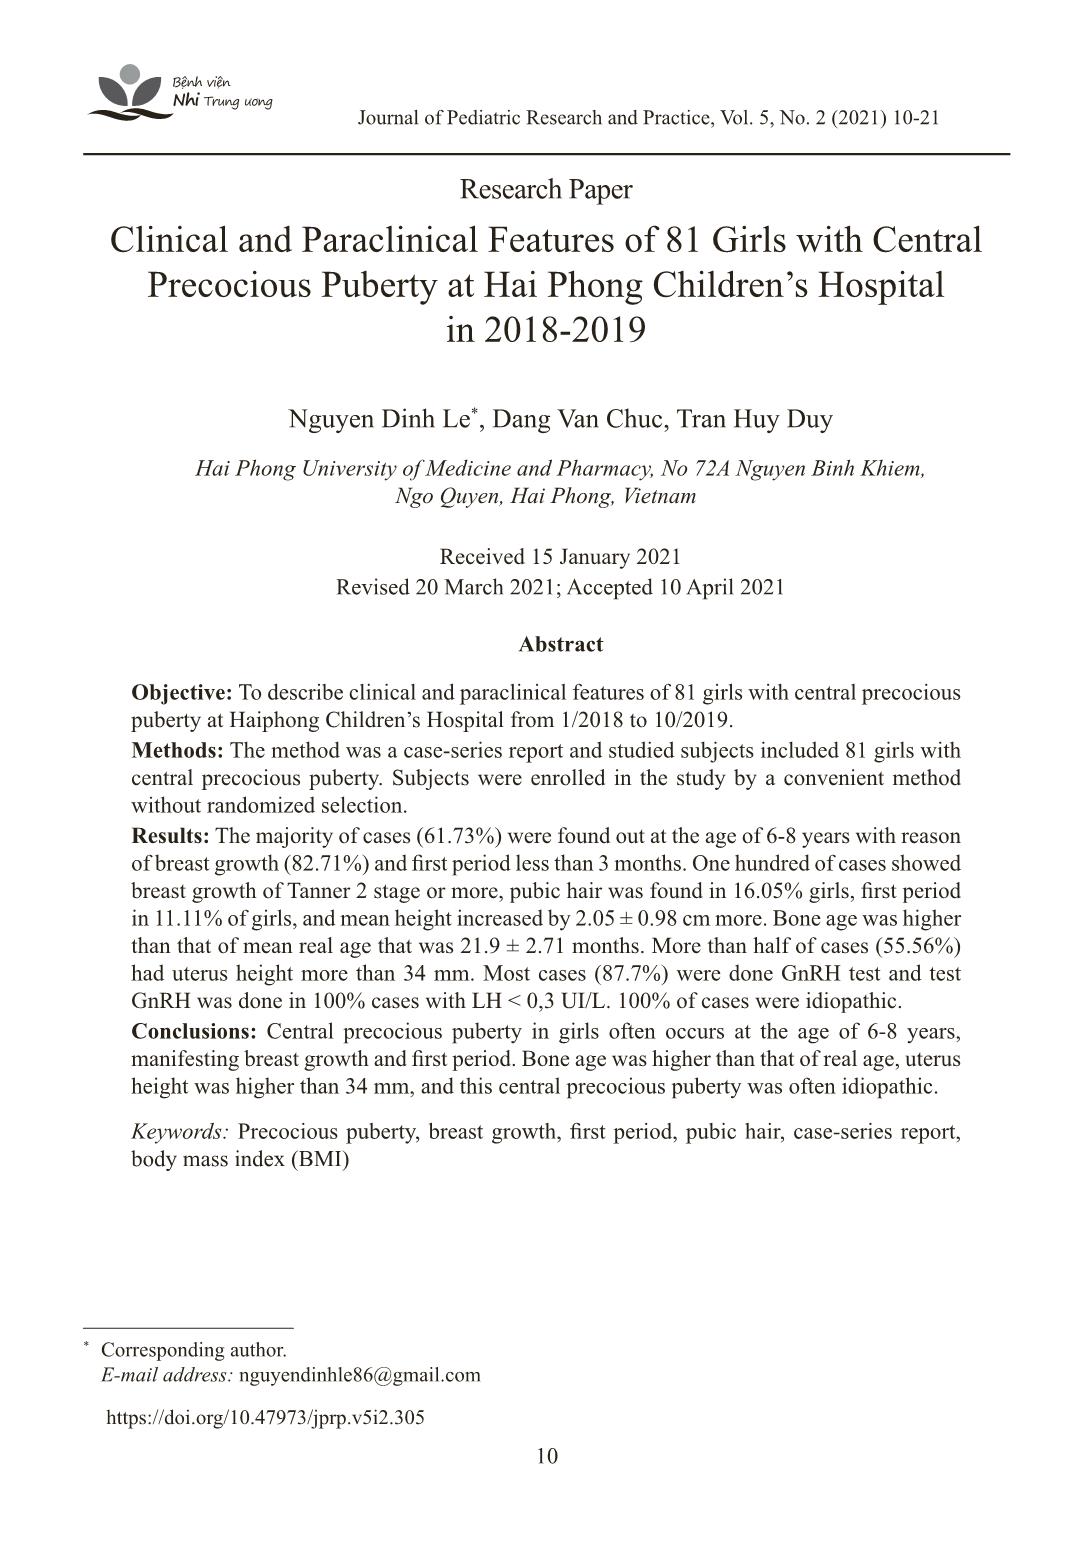 Clinical and Paraclinical Features of 81 Girls with Central Precocious Puberty at Hai Phong Children’s Hospital in 2018-2019 trang 1